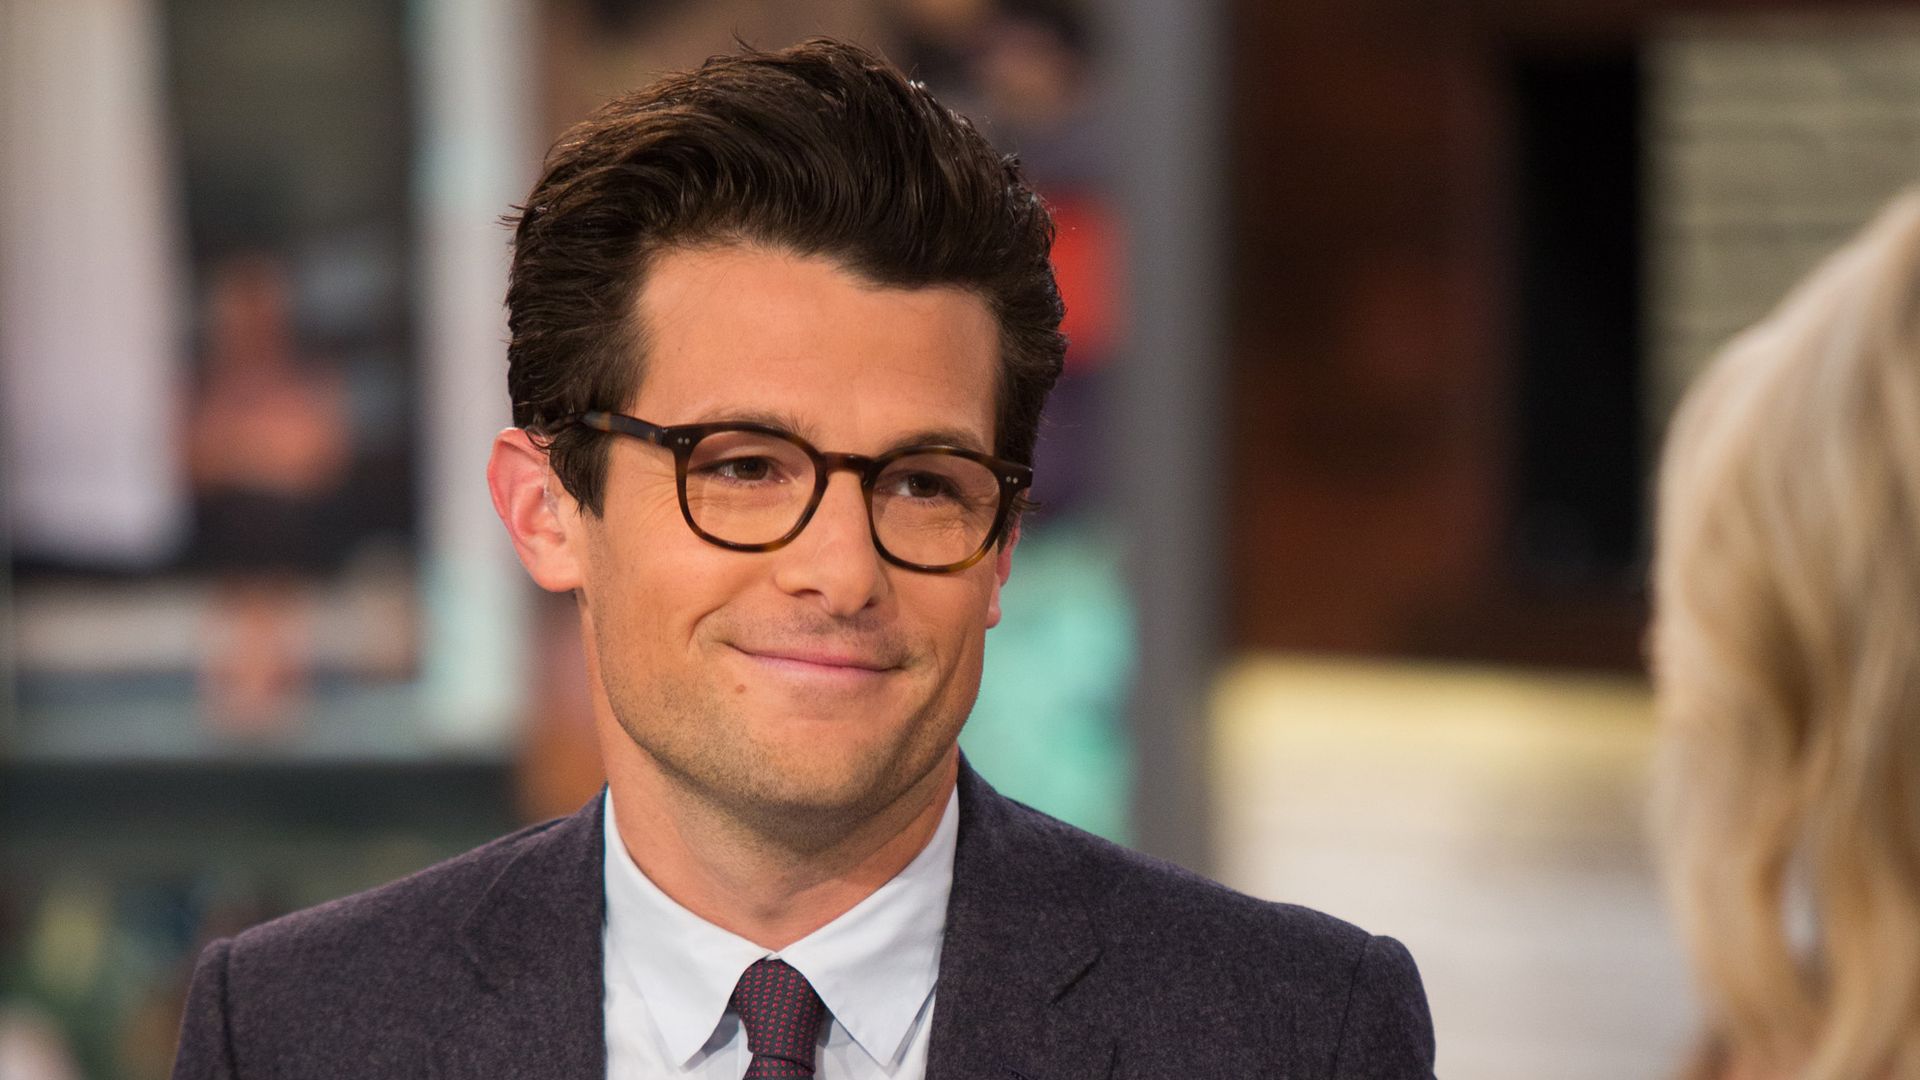 Jacob Soboroff on the Today Show on January 18, 2018